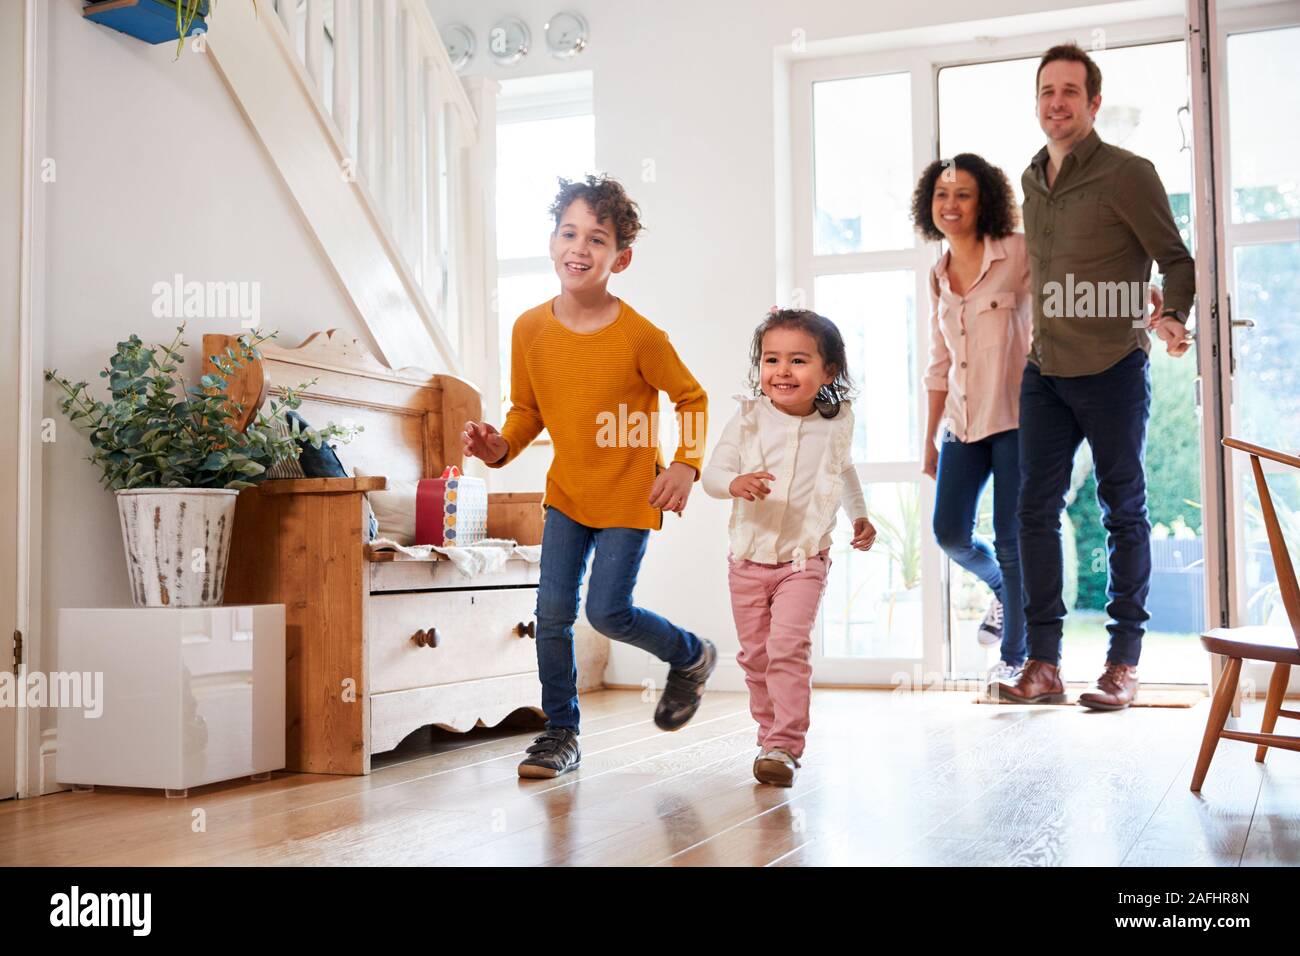 Family Returning Home After Trip Out With Excited Children Running Ahead Stock Photo